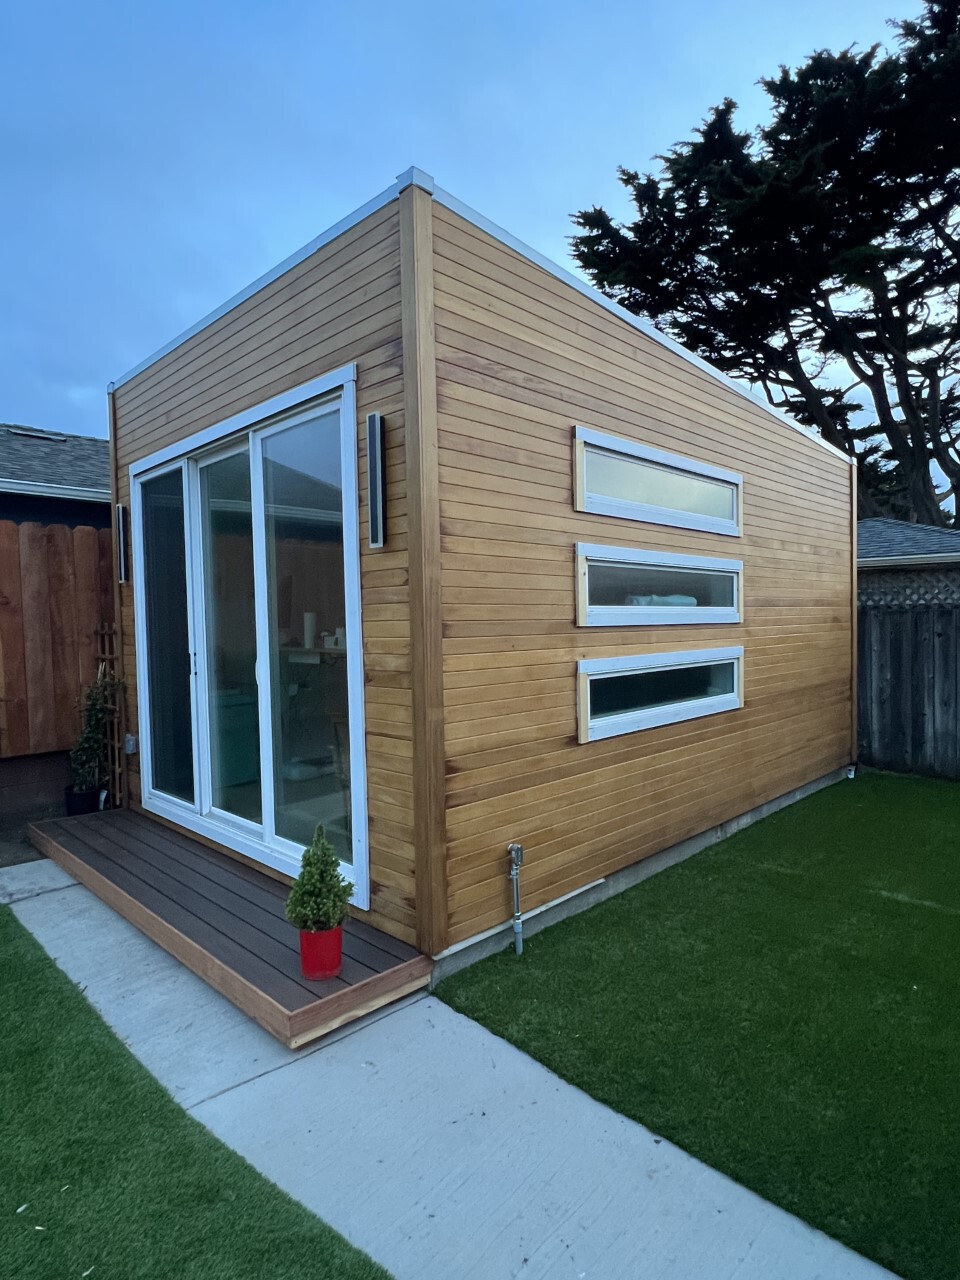 Side view of 18’ x 12' Quadra Home Studio located in Pacifica, California – Summerwood Products